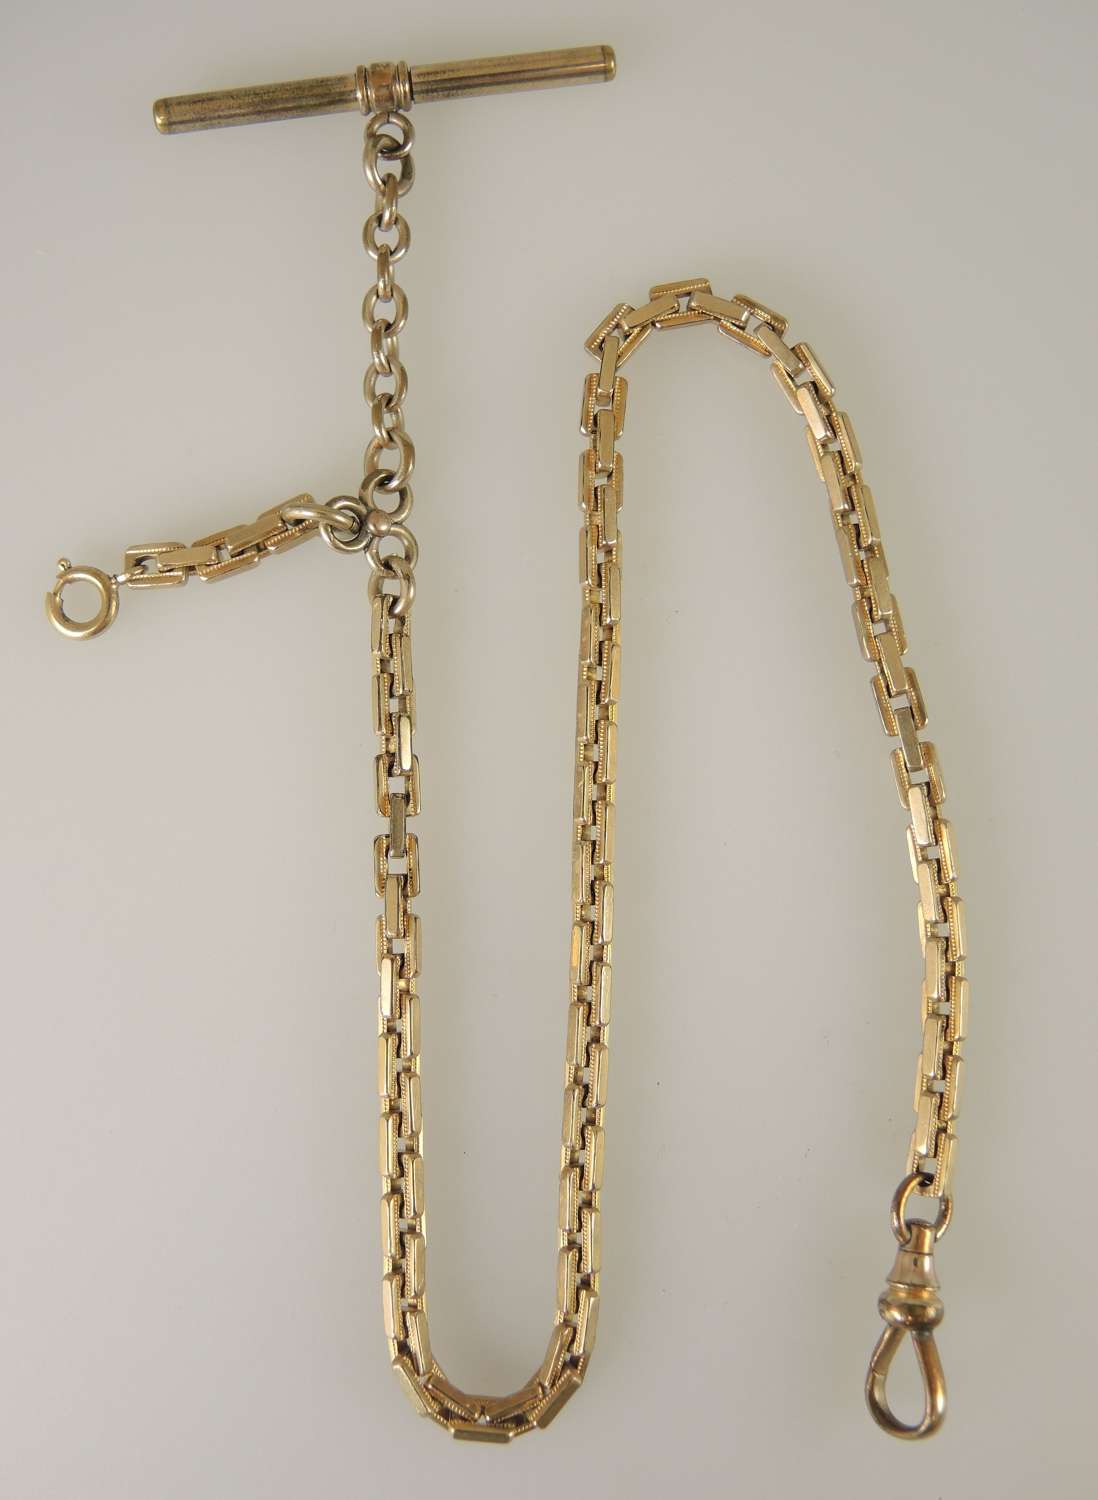 Vintage gold plated watch chain c1890